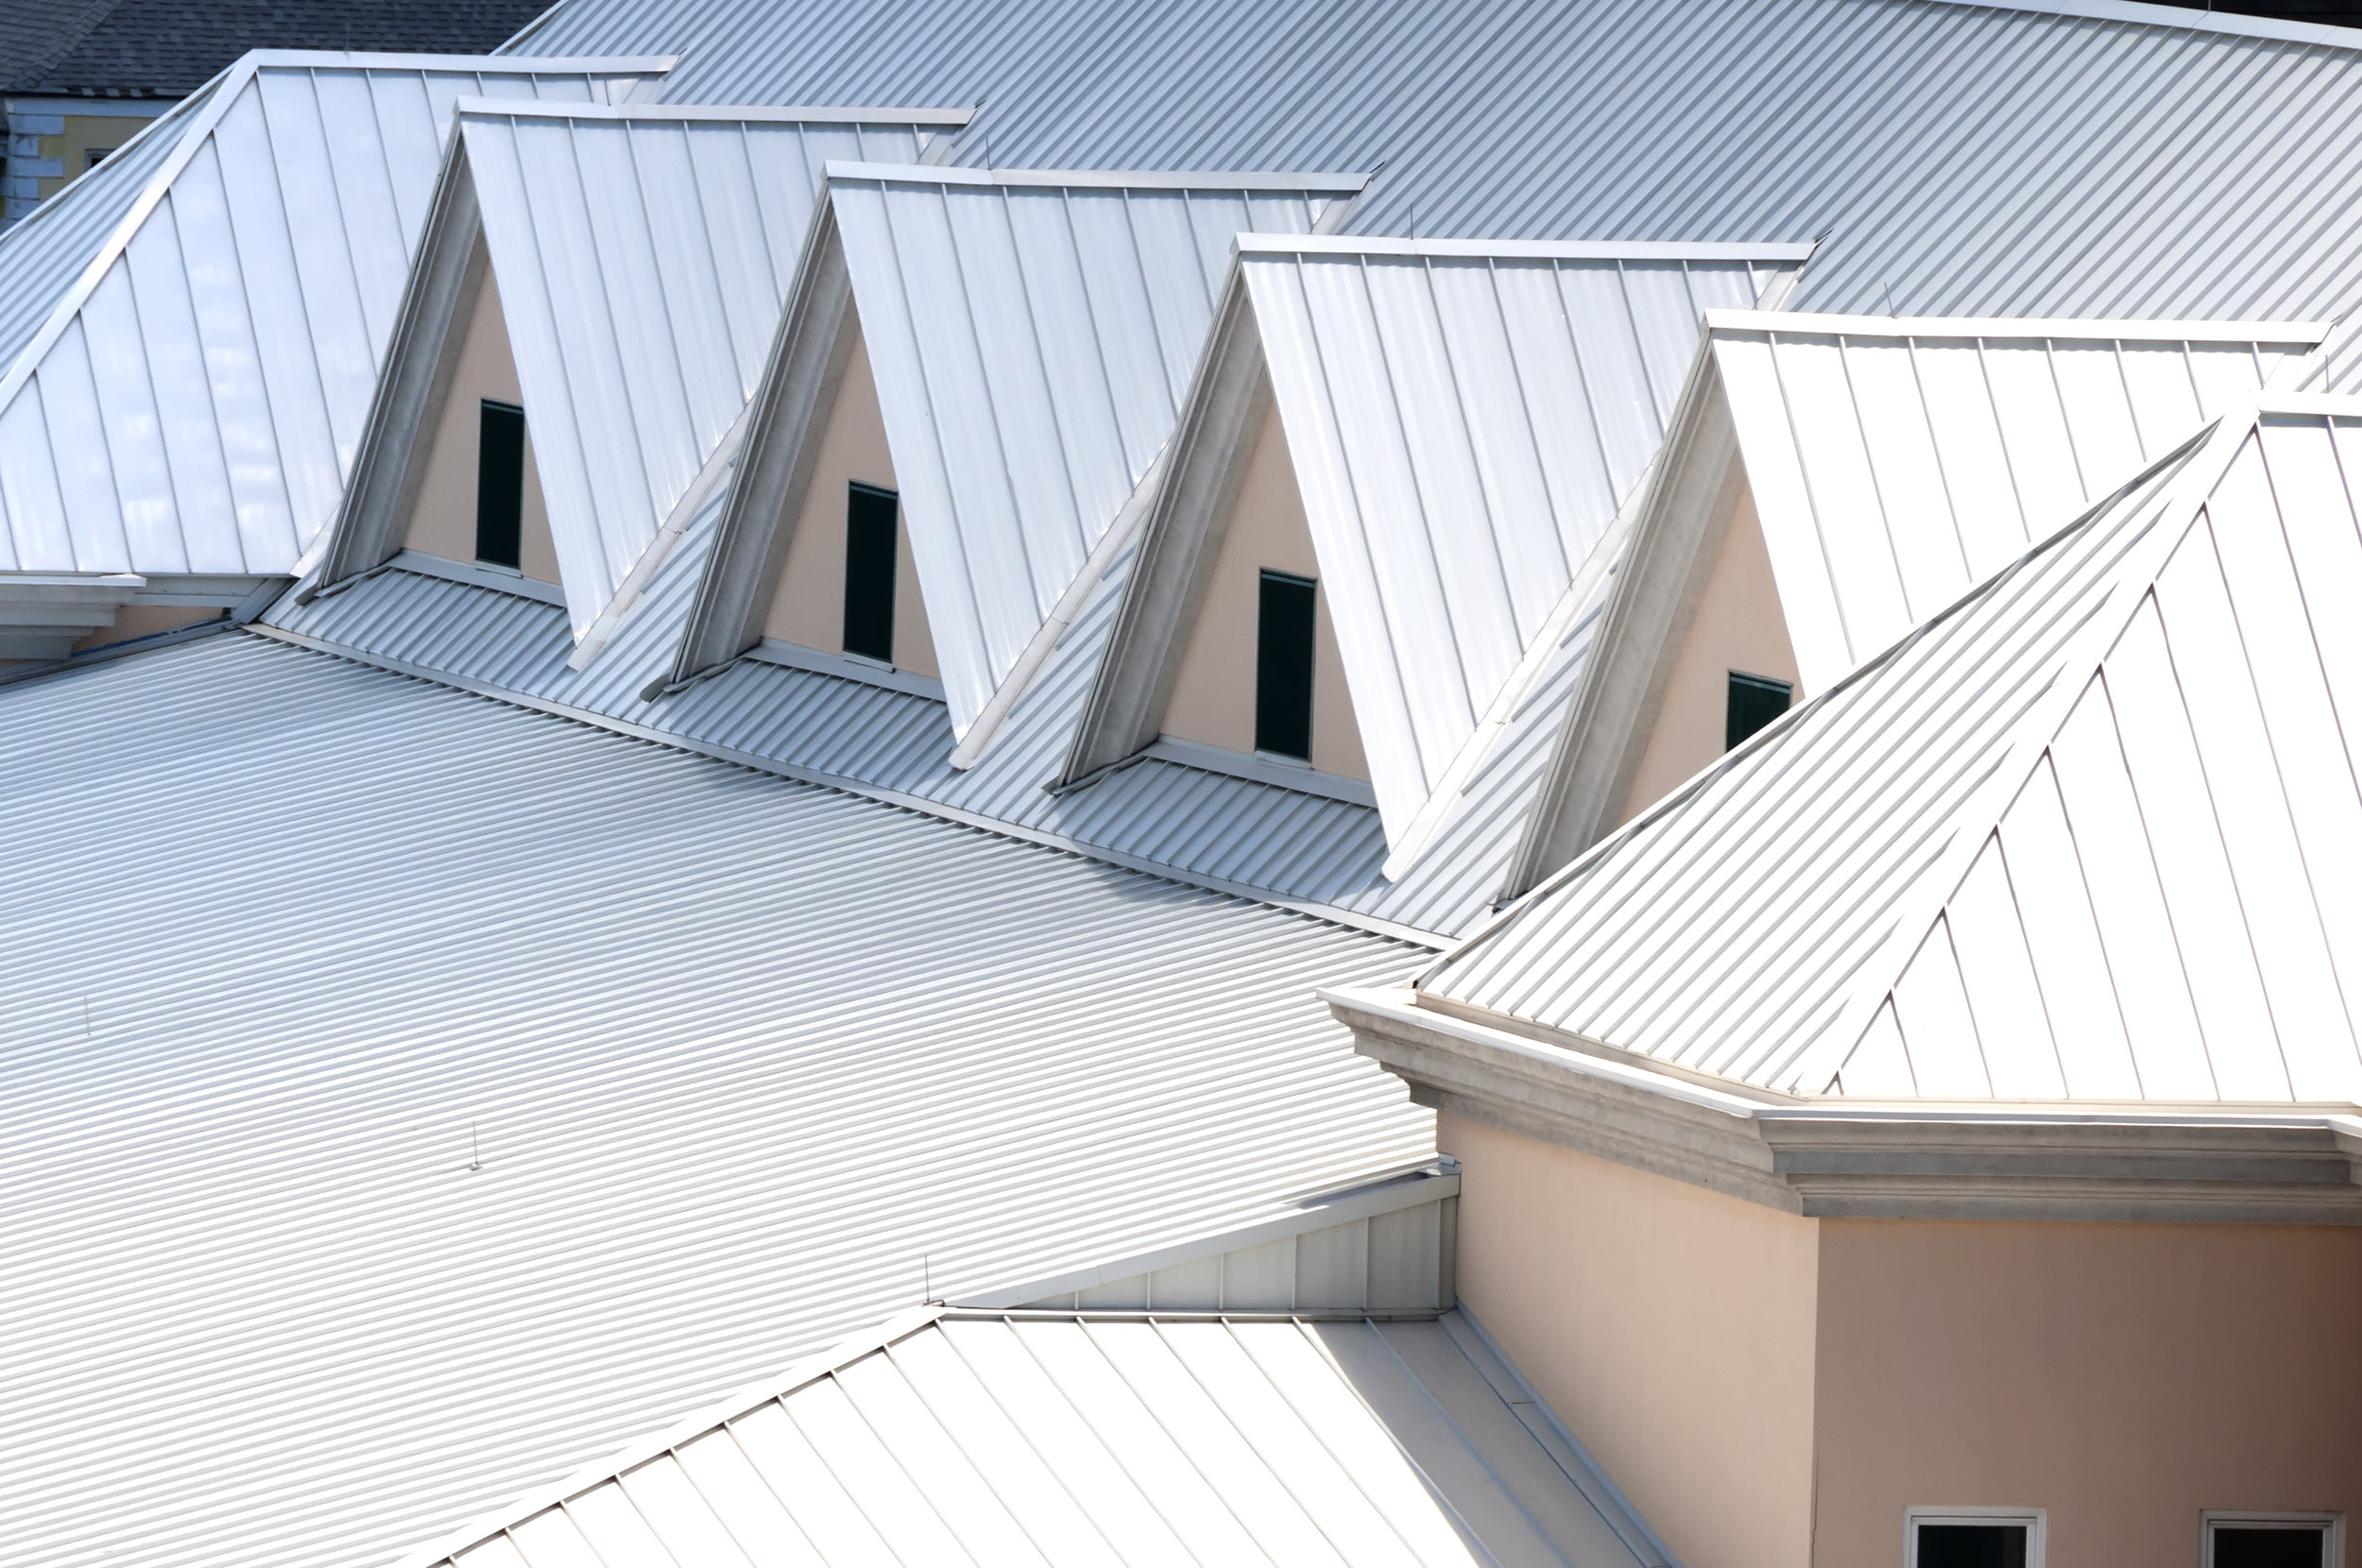 Metal Roofing – How to Finding Responsible Metal Roofing Contractor